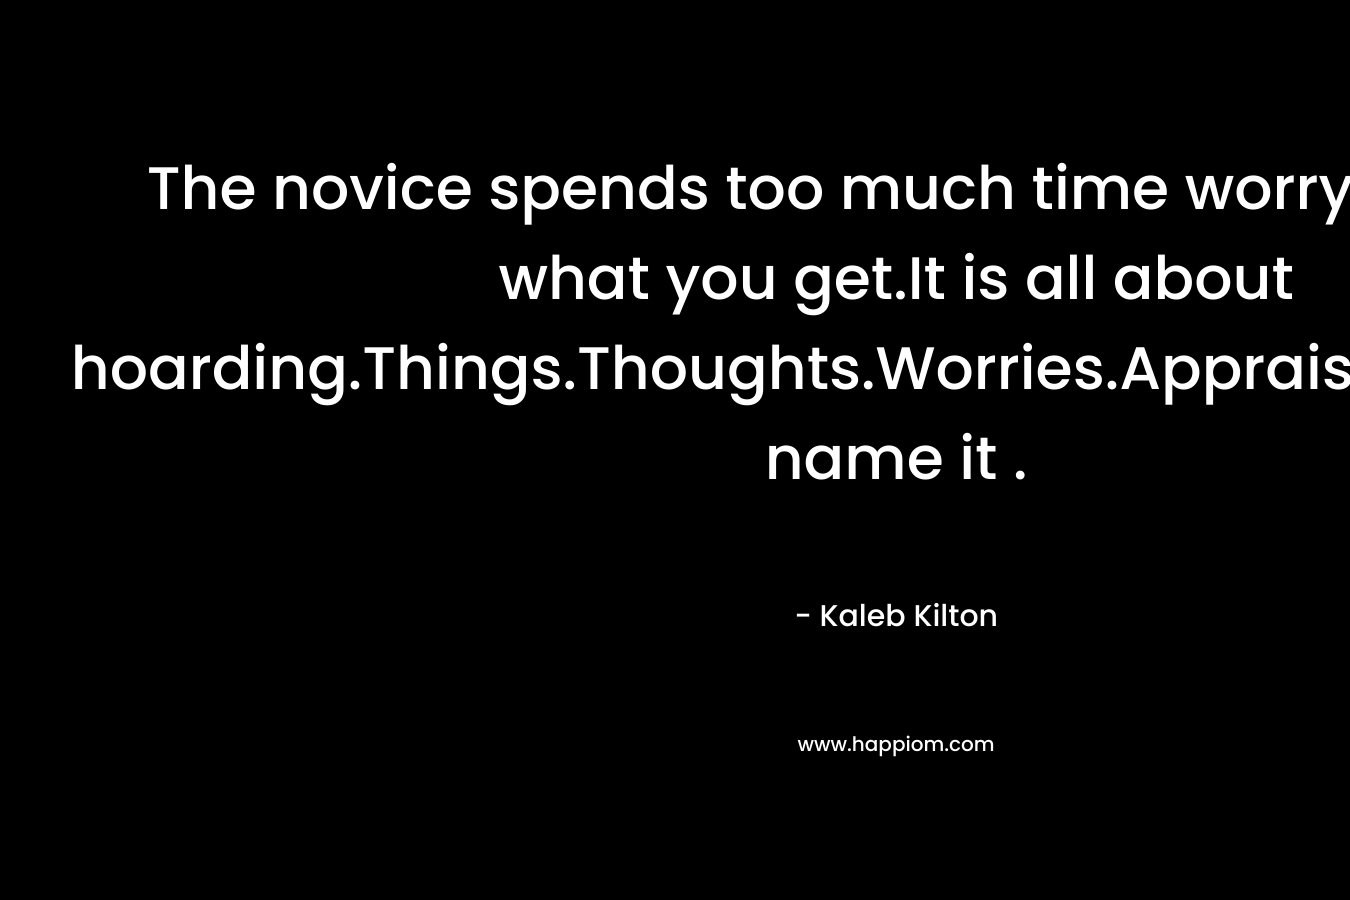 The novice spends too much time worrying about what you get.It is all about hoarding.Things.Thoughts.Worries.Appraisals.Love.You name it . – Kaleb Kilton